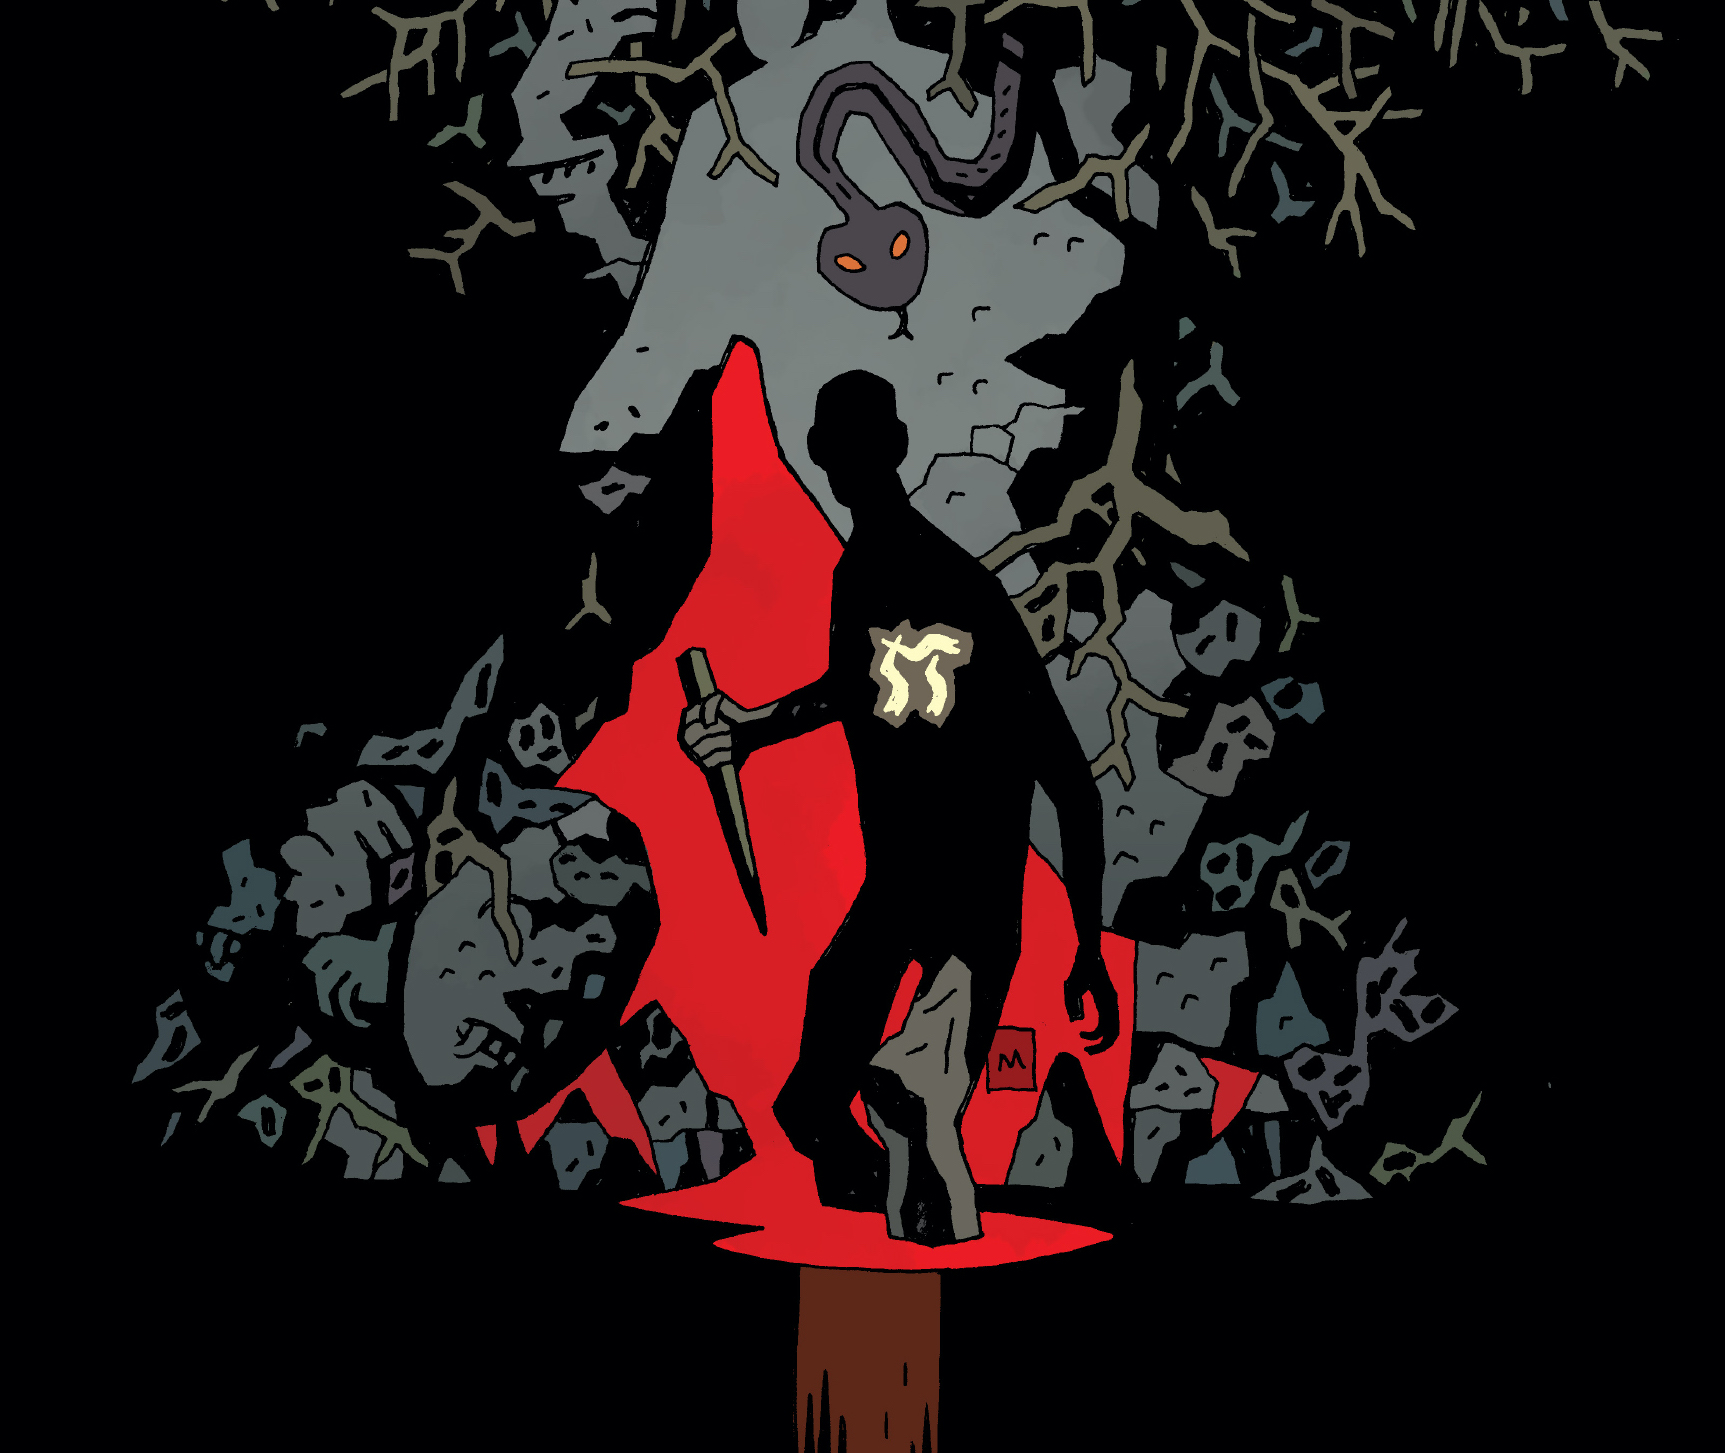 EXCLUSIVE: Read 'B.P.R.D.: Vampire' by Mike Mignola, Gabriel Bá and Fábio Moon right now